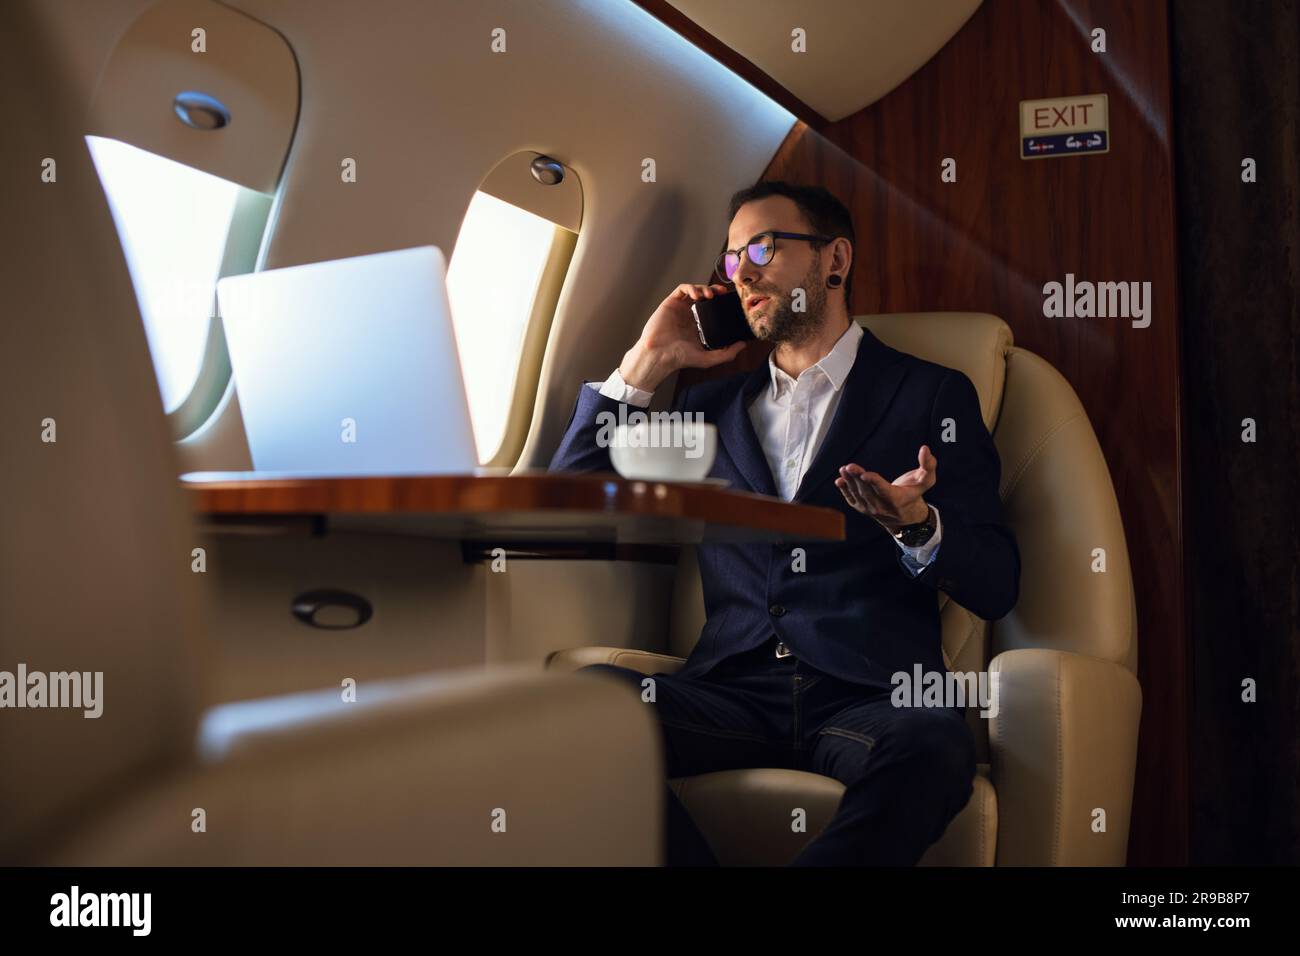 Elegant Young CEO Businessman in eyeglasses talking on a smartphone before take-off, inside a private airplane jet, Travel luxury airline concept Stock Photo